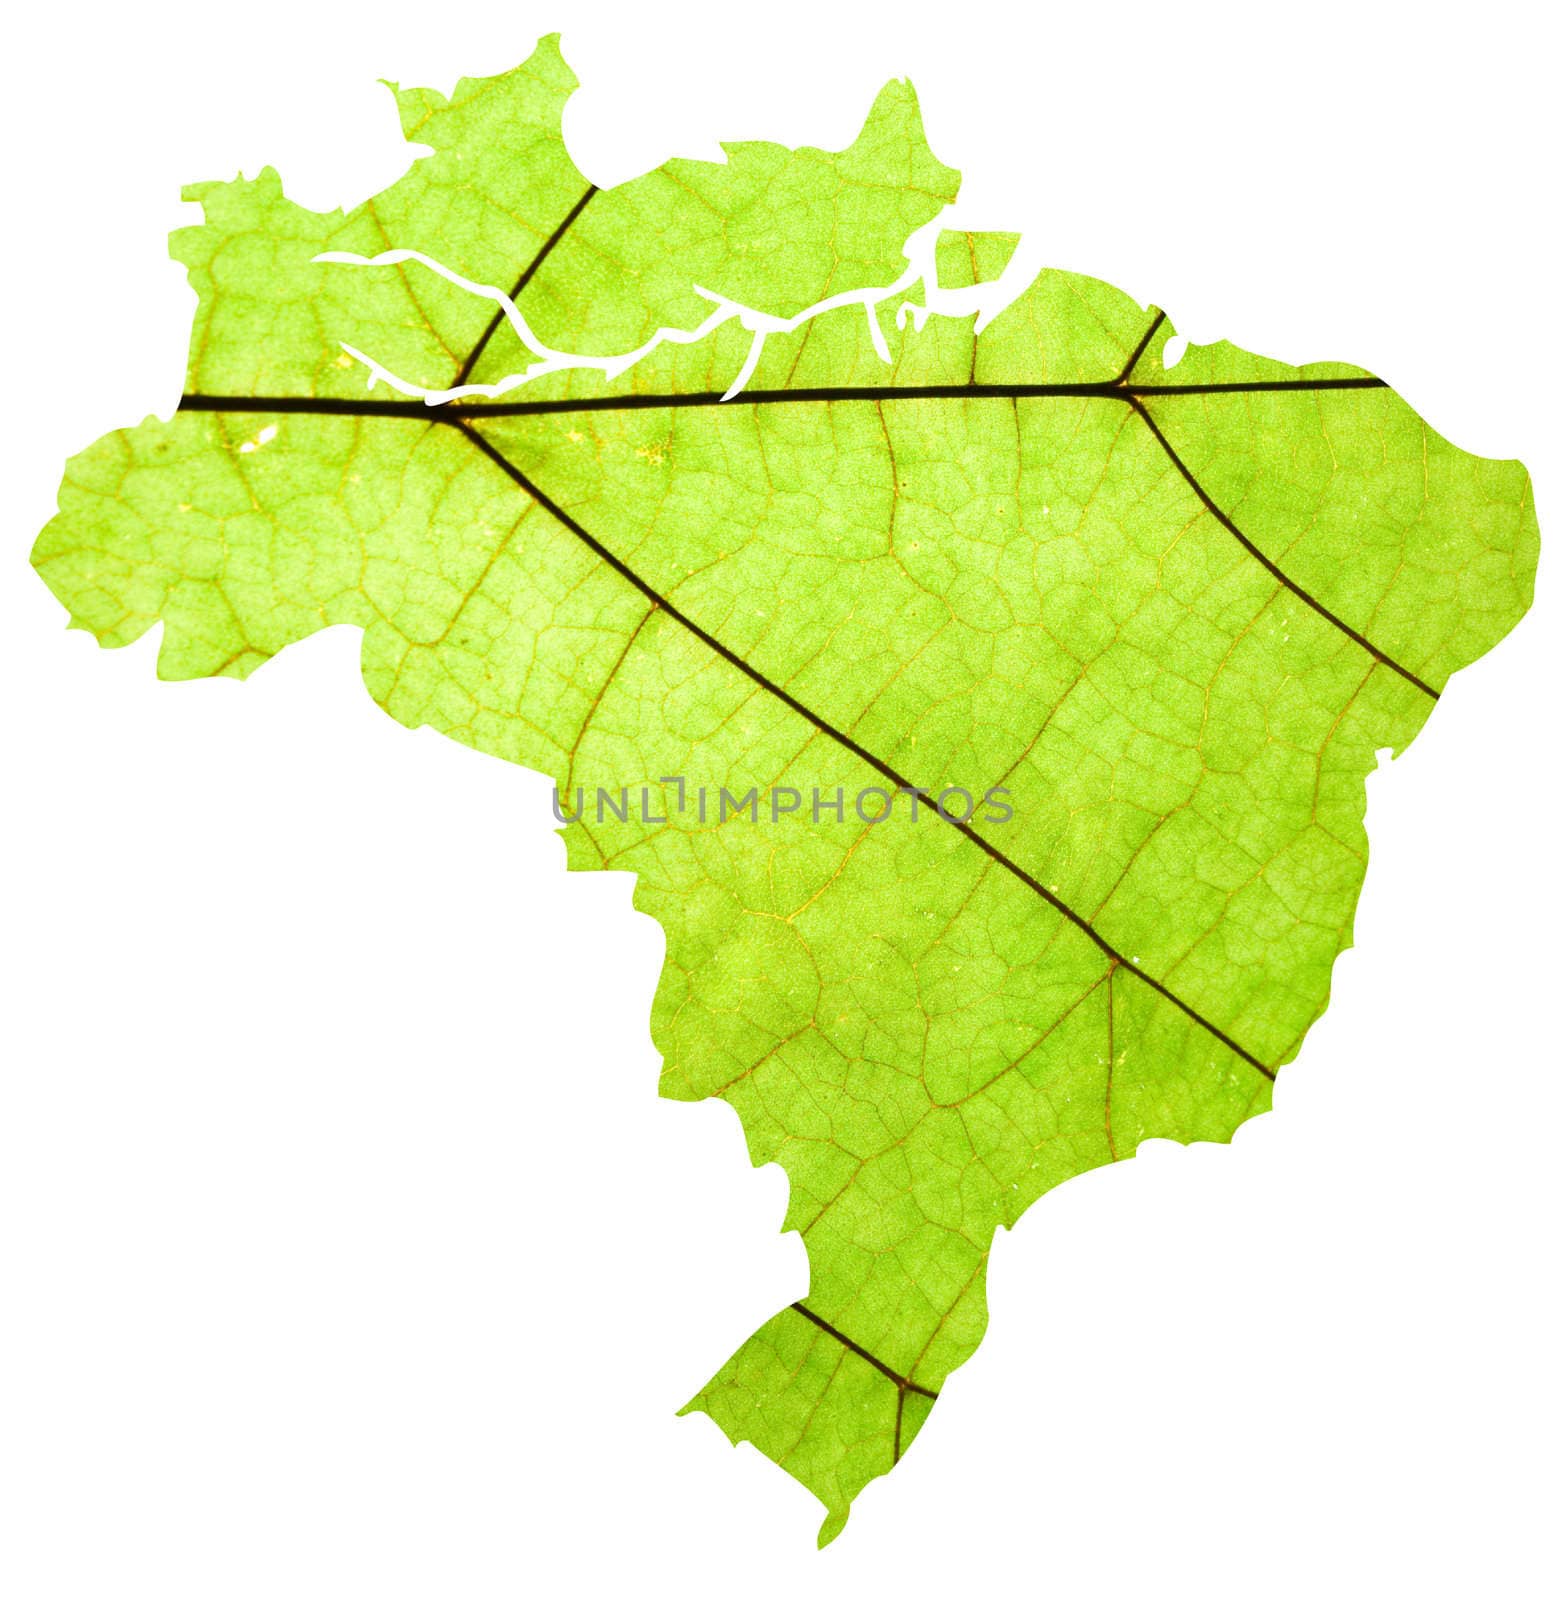 map of Brazil in green leaf detail texture